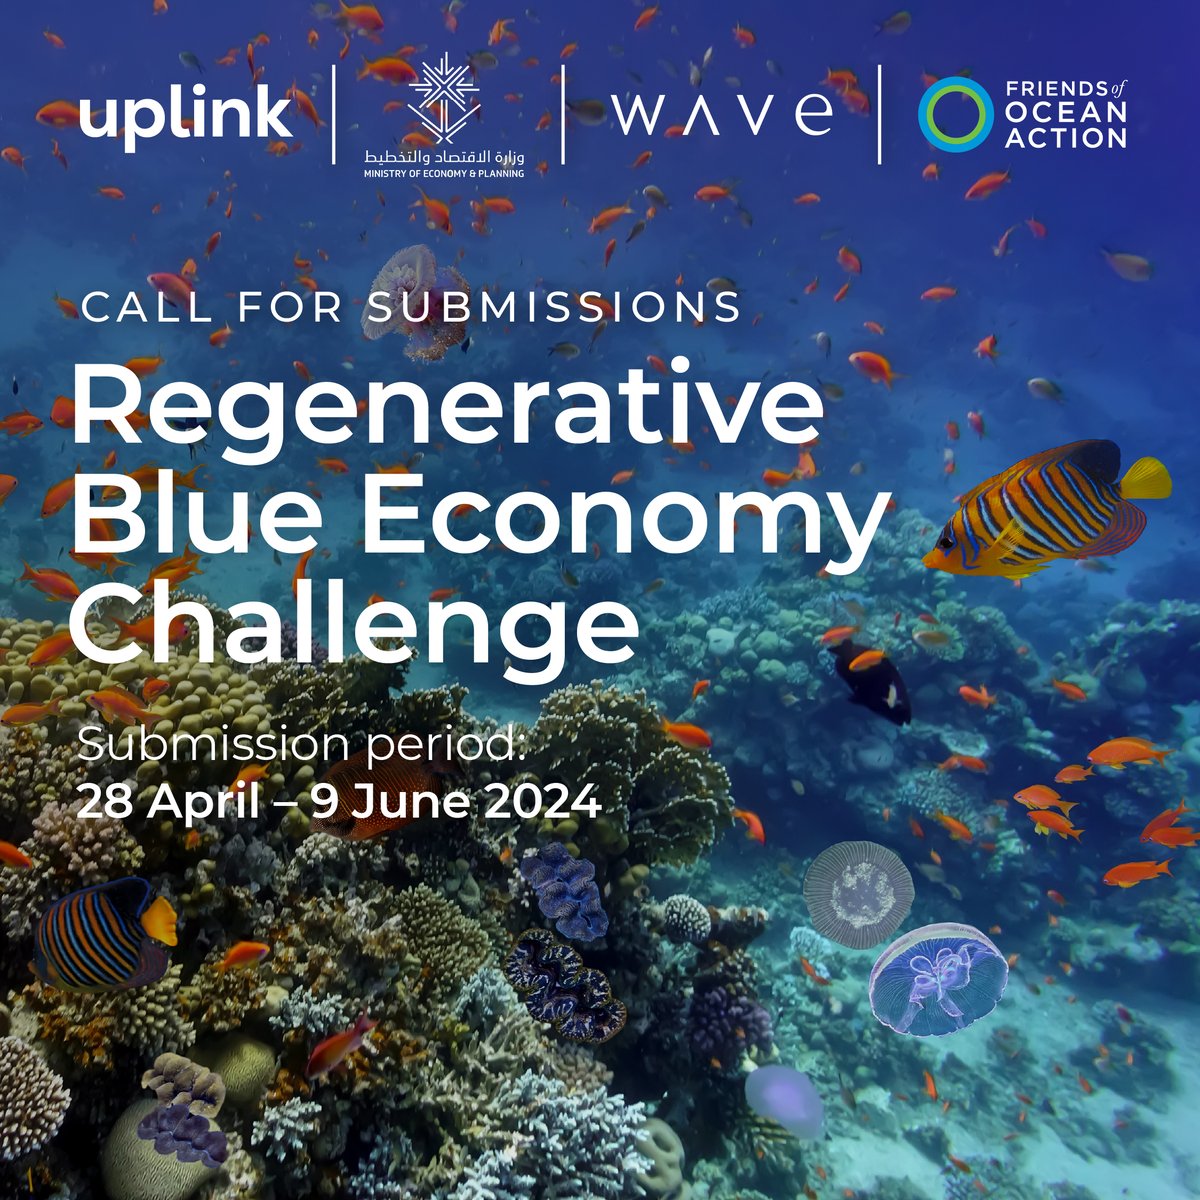 #GFCR is proud to partner with @WEFUpLink for the Regenerative Blue Economy Challenge! Calling on visionary startups supporting marine pollution solutions & harnessing data to protect #ocean ecosystems. Submit your innovative solutions ⏩ wef.ch/3JCP7jK #BlueEconomy